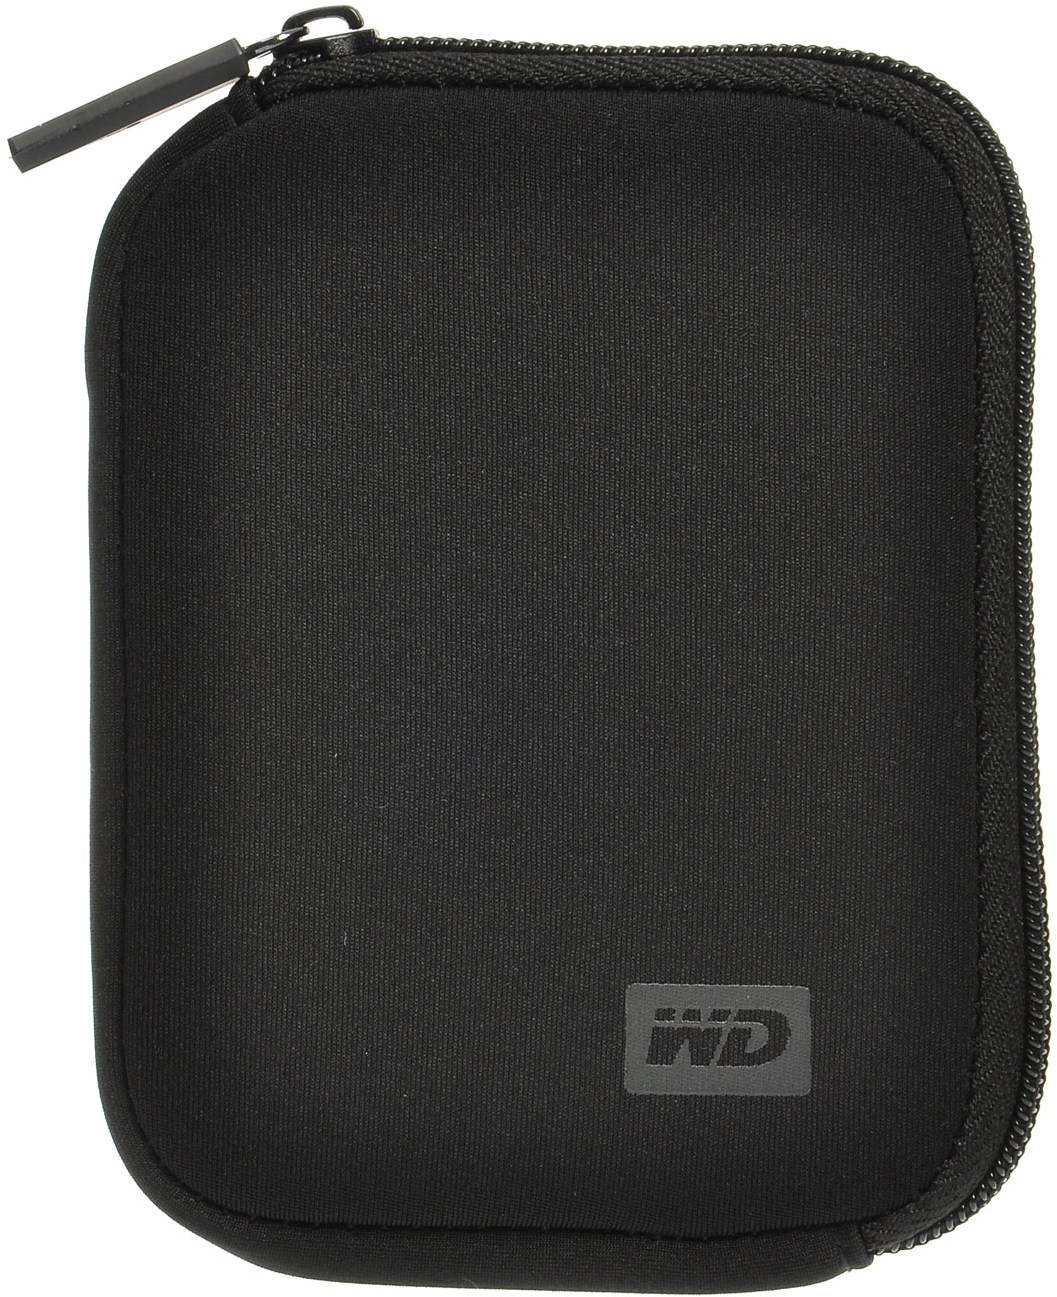 WD My Passport Carrying Case